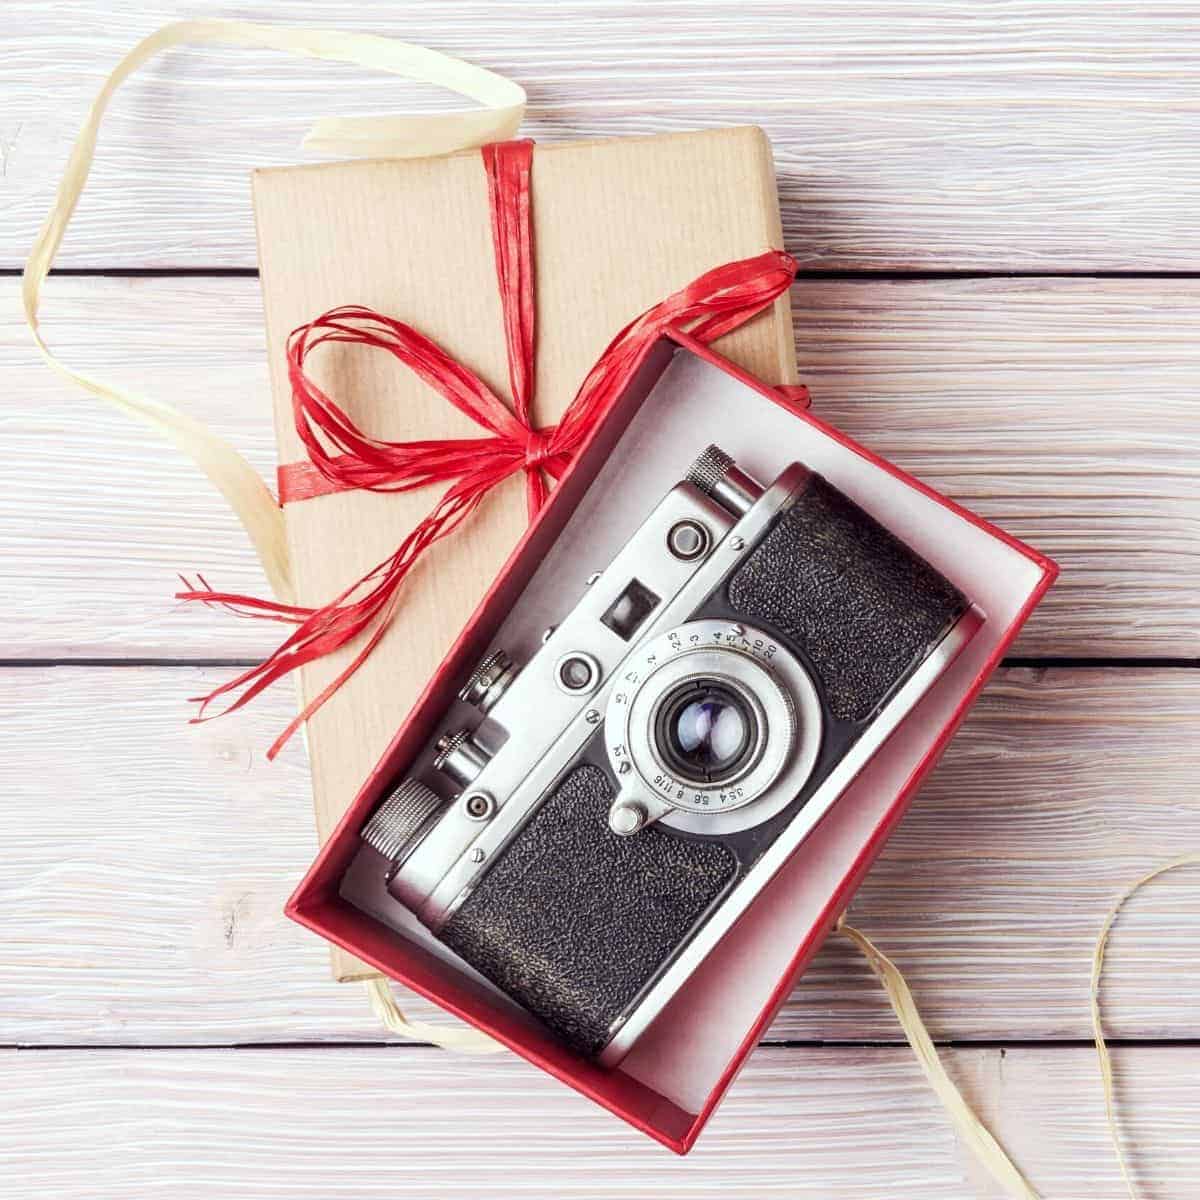 Camera in a gift box on a wooden table.